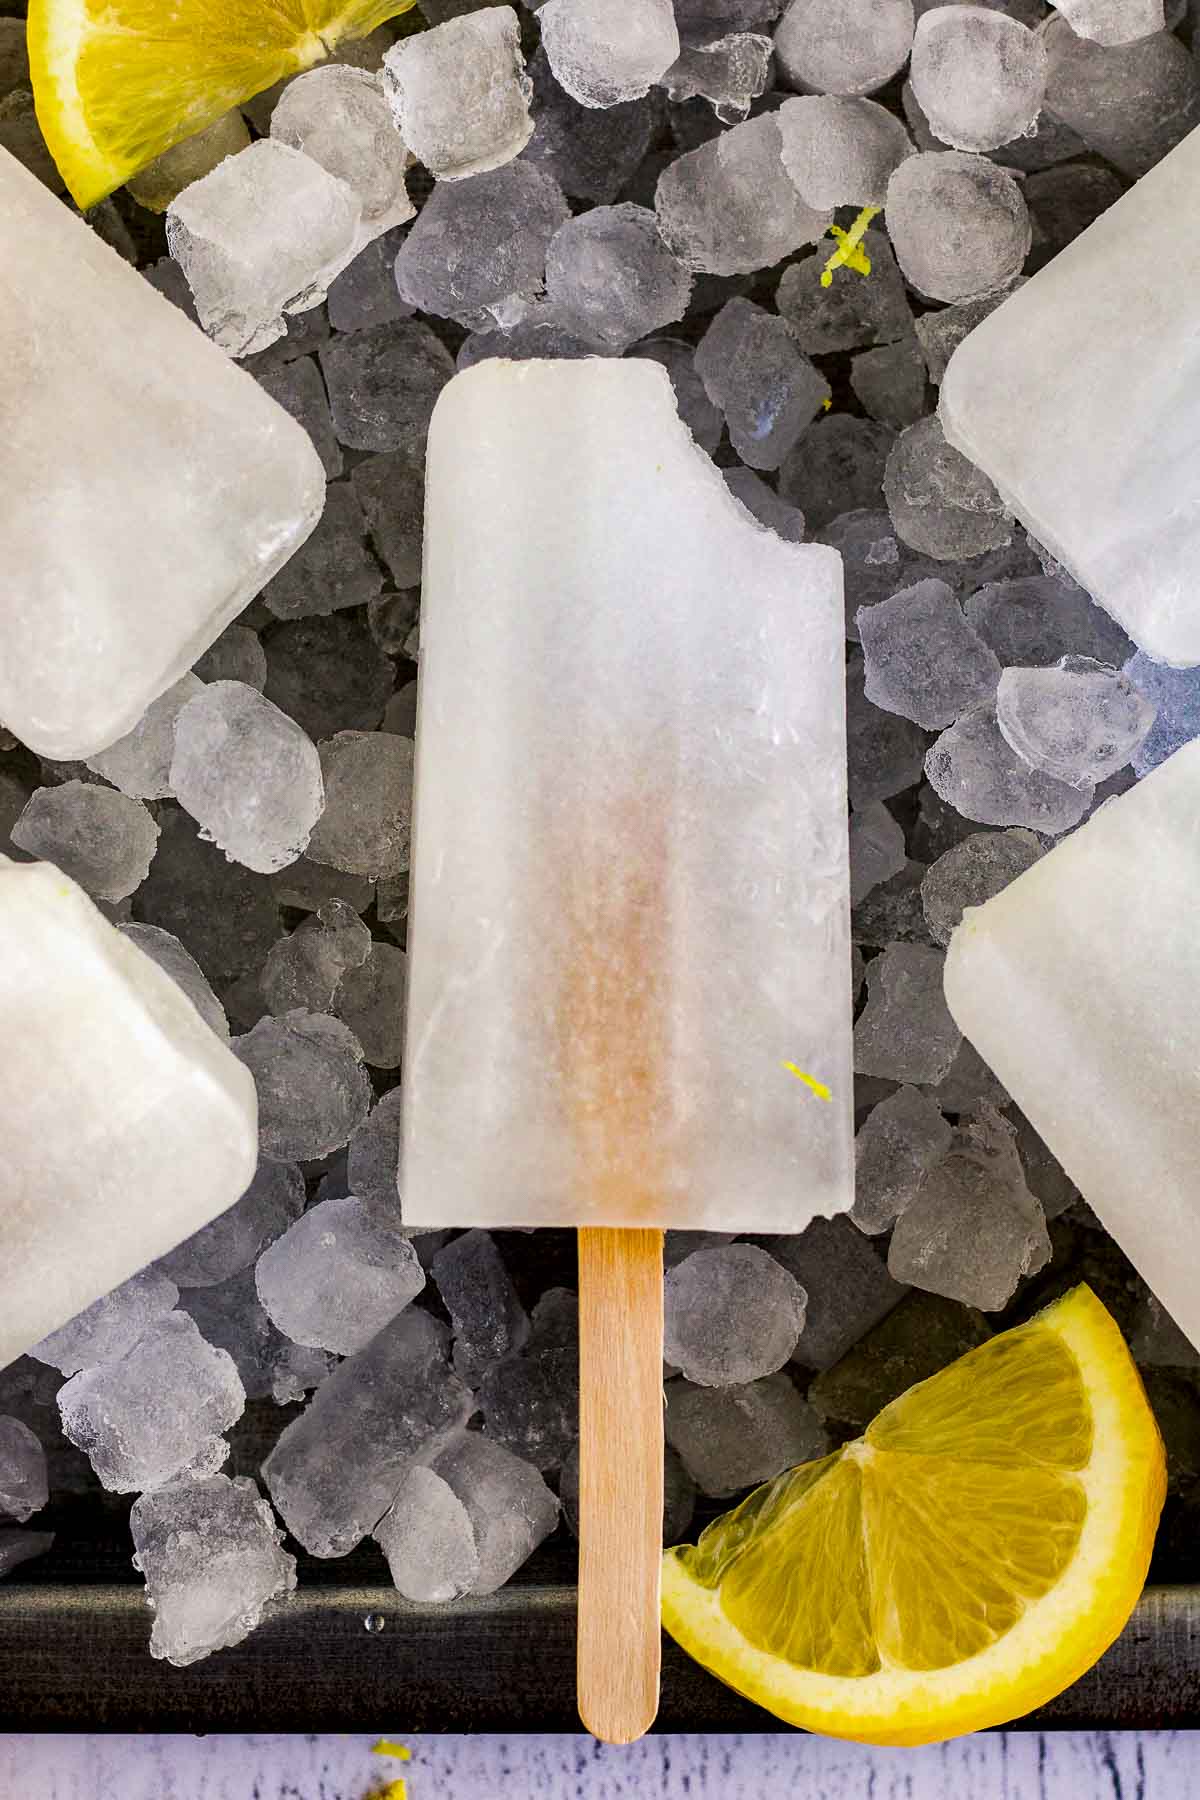 A lemonade popsicle with a bite taken out of it.